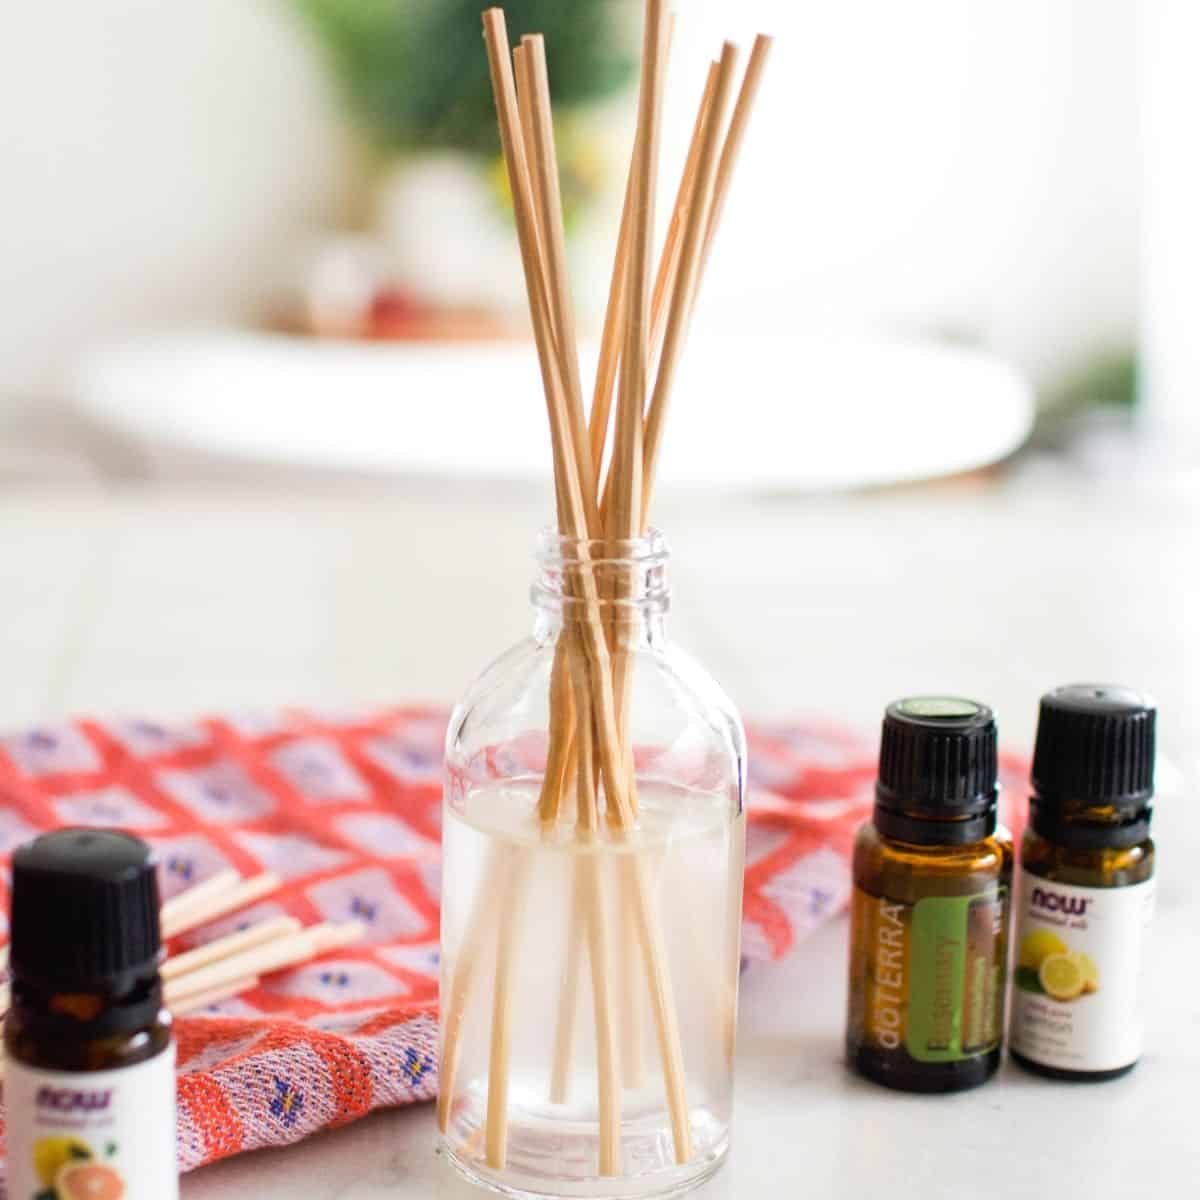 Aromatherapy Diffusers: 4 Different Types and How to Make Your Own